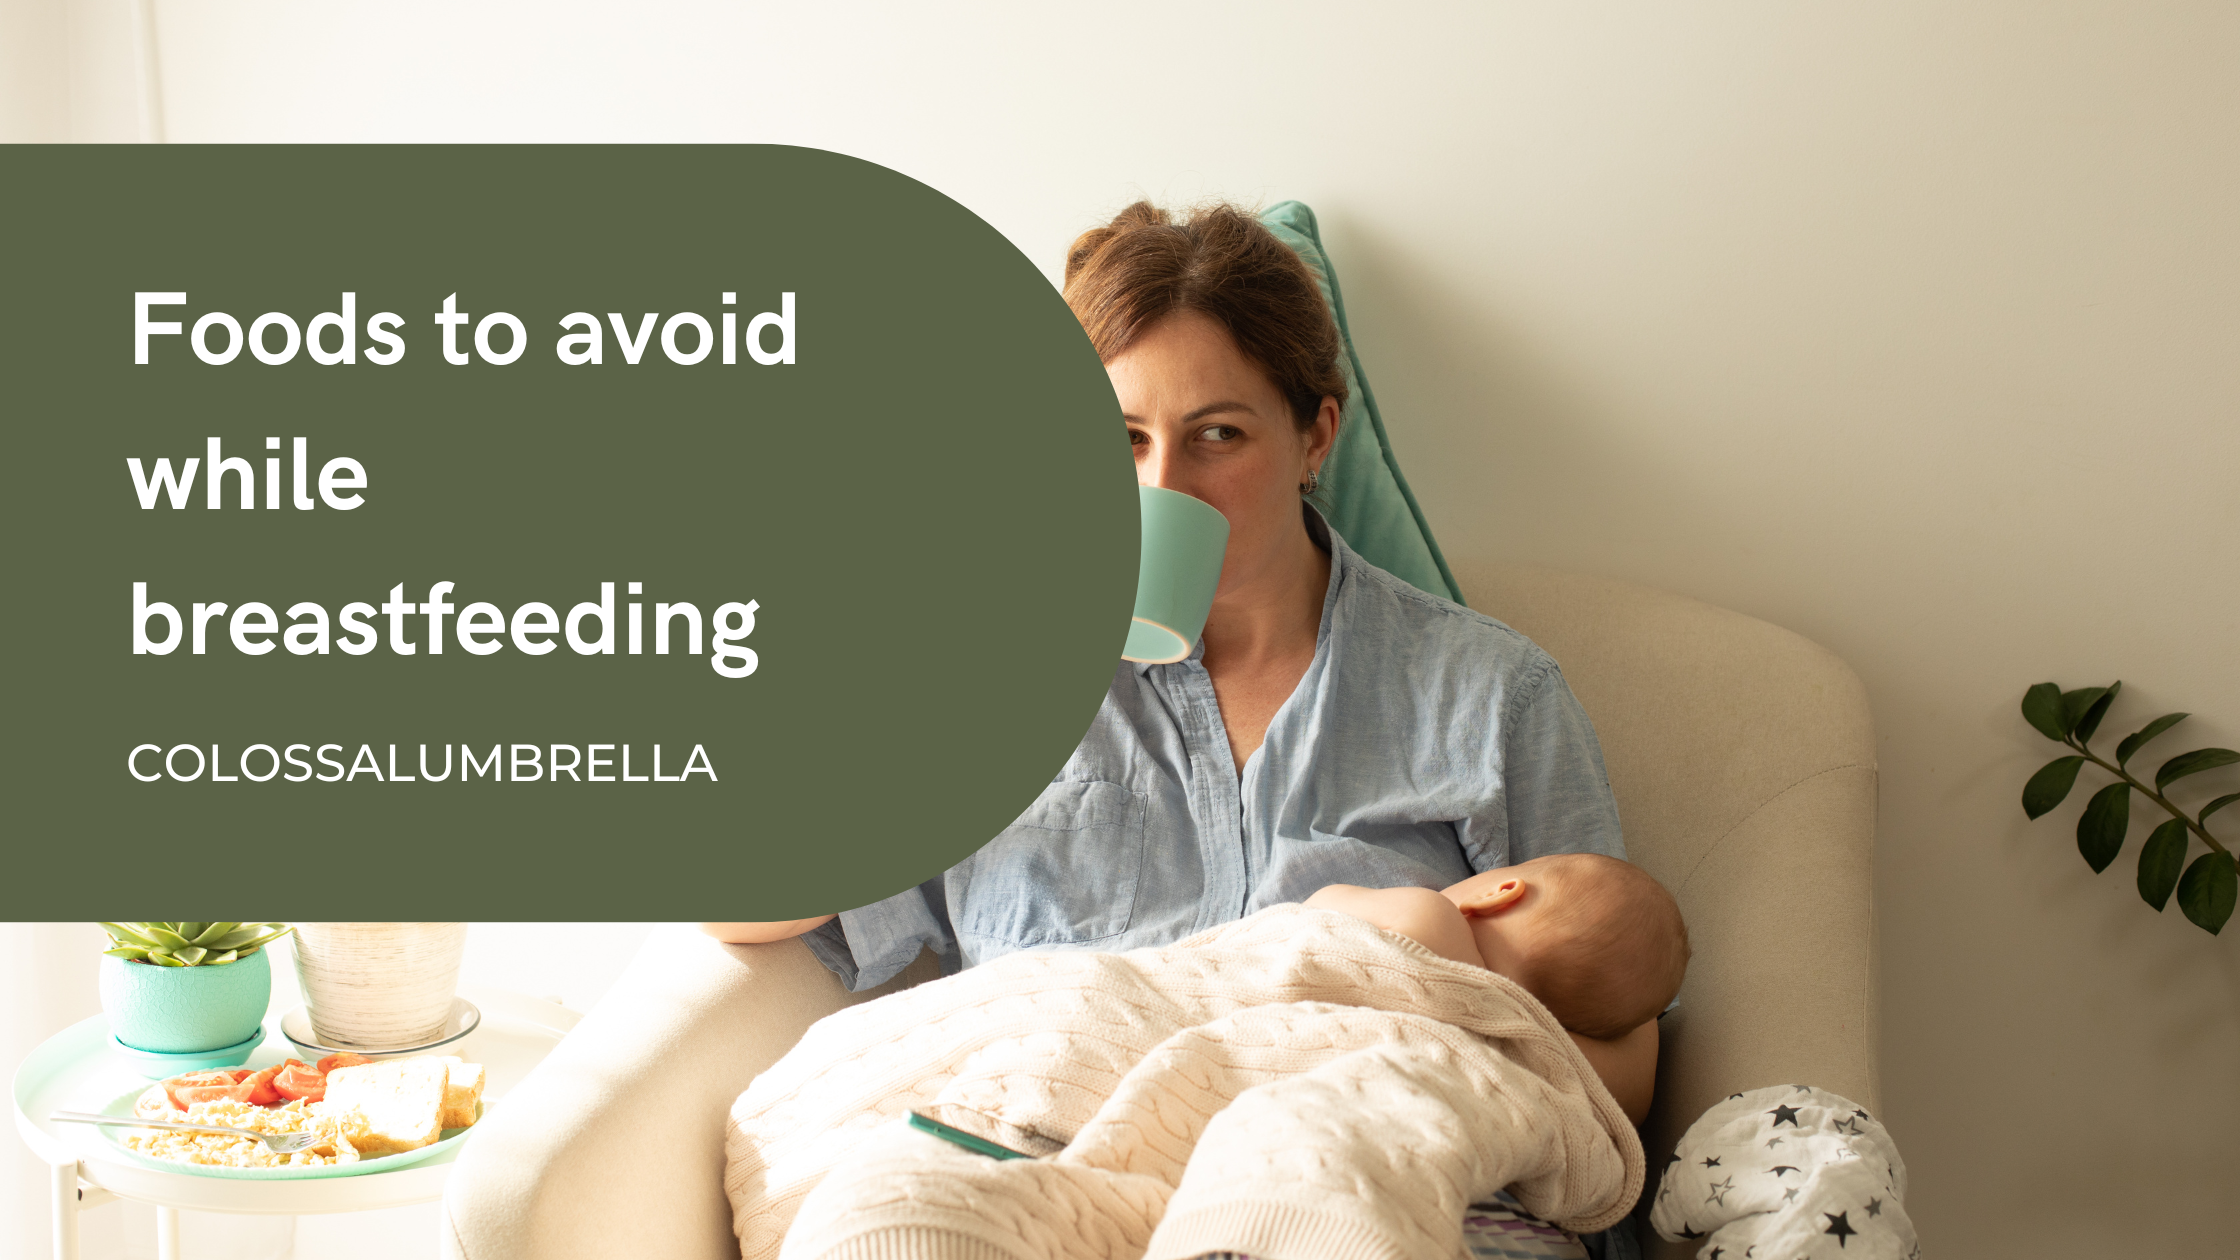 9 Foods to avoid while breastfeeding to prevent gas in babies